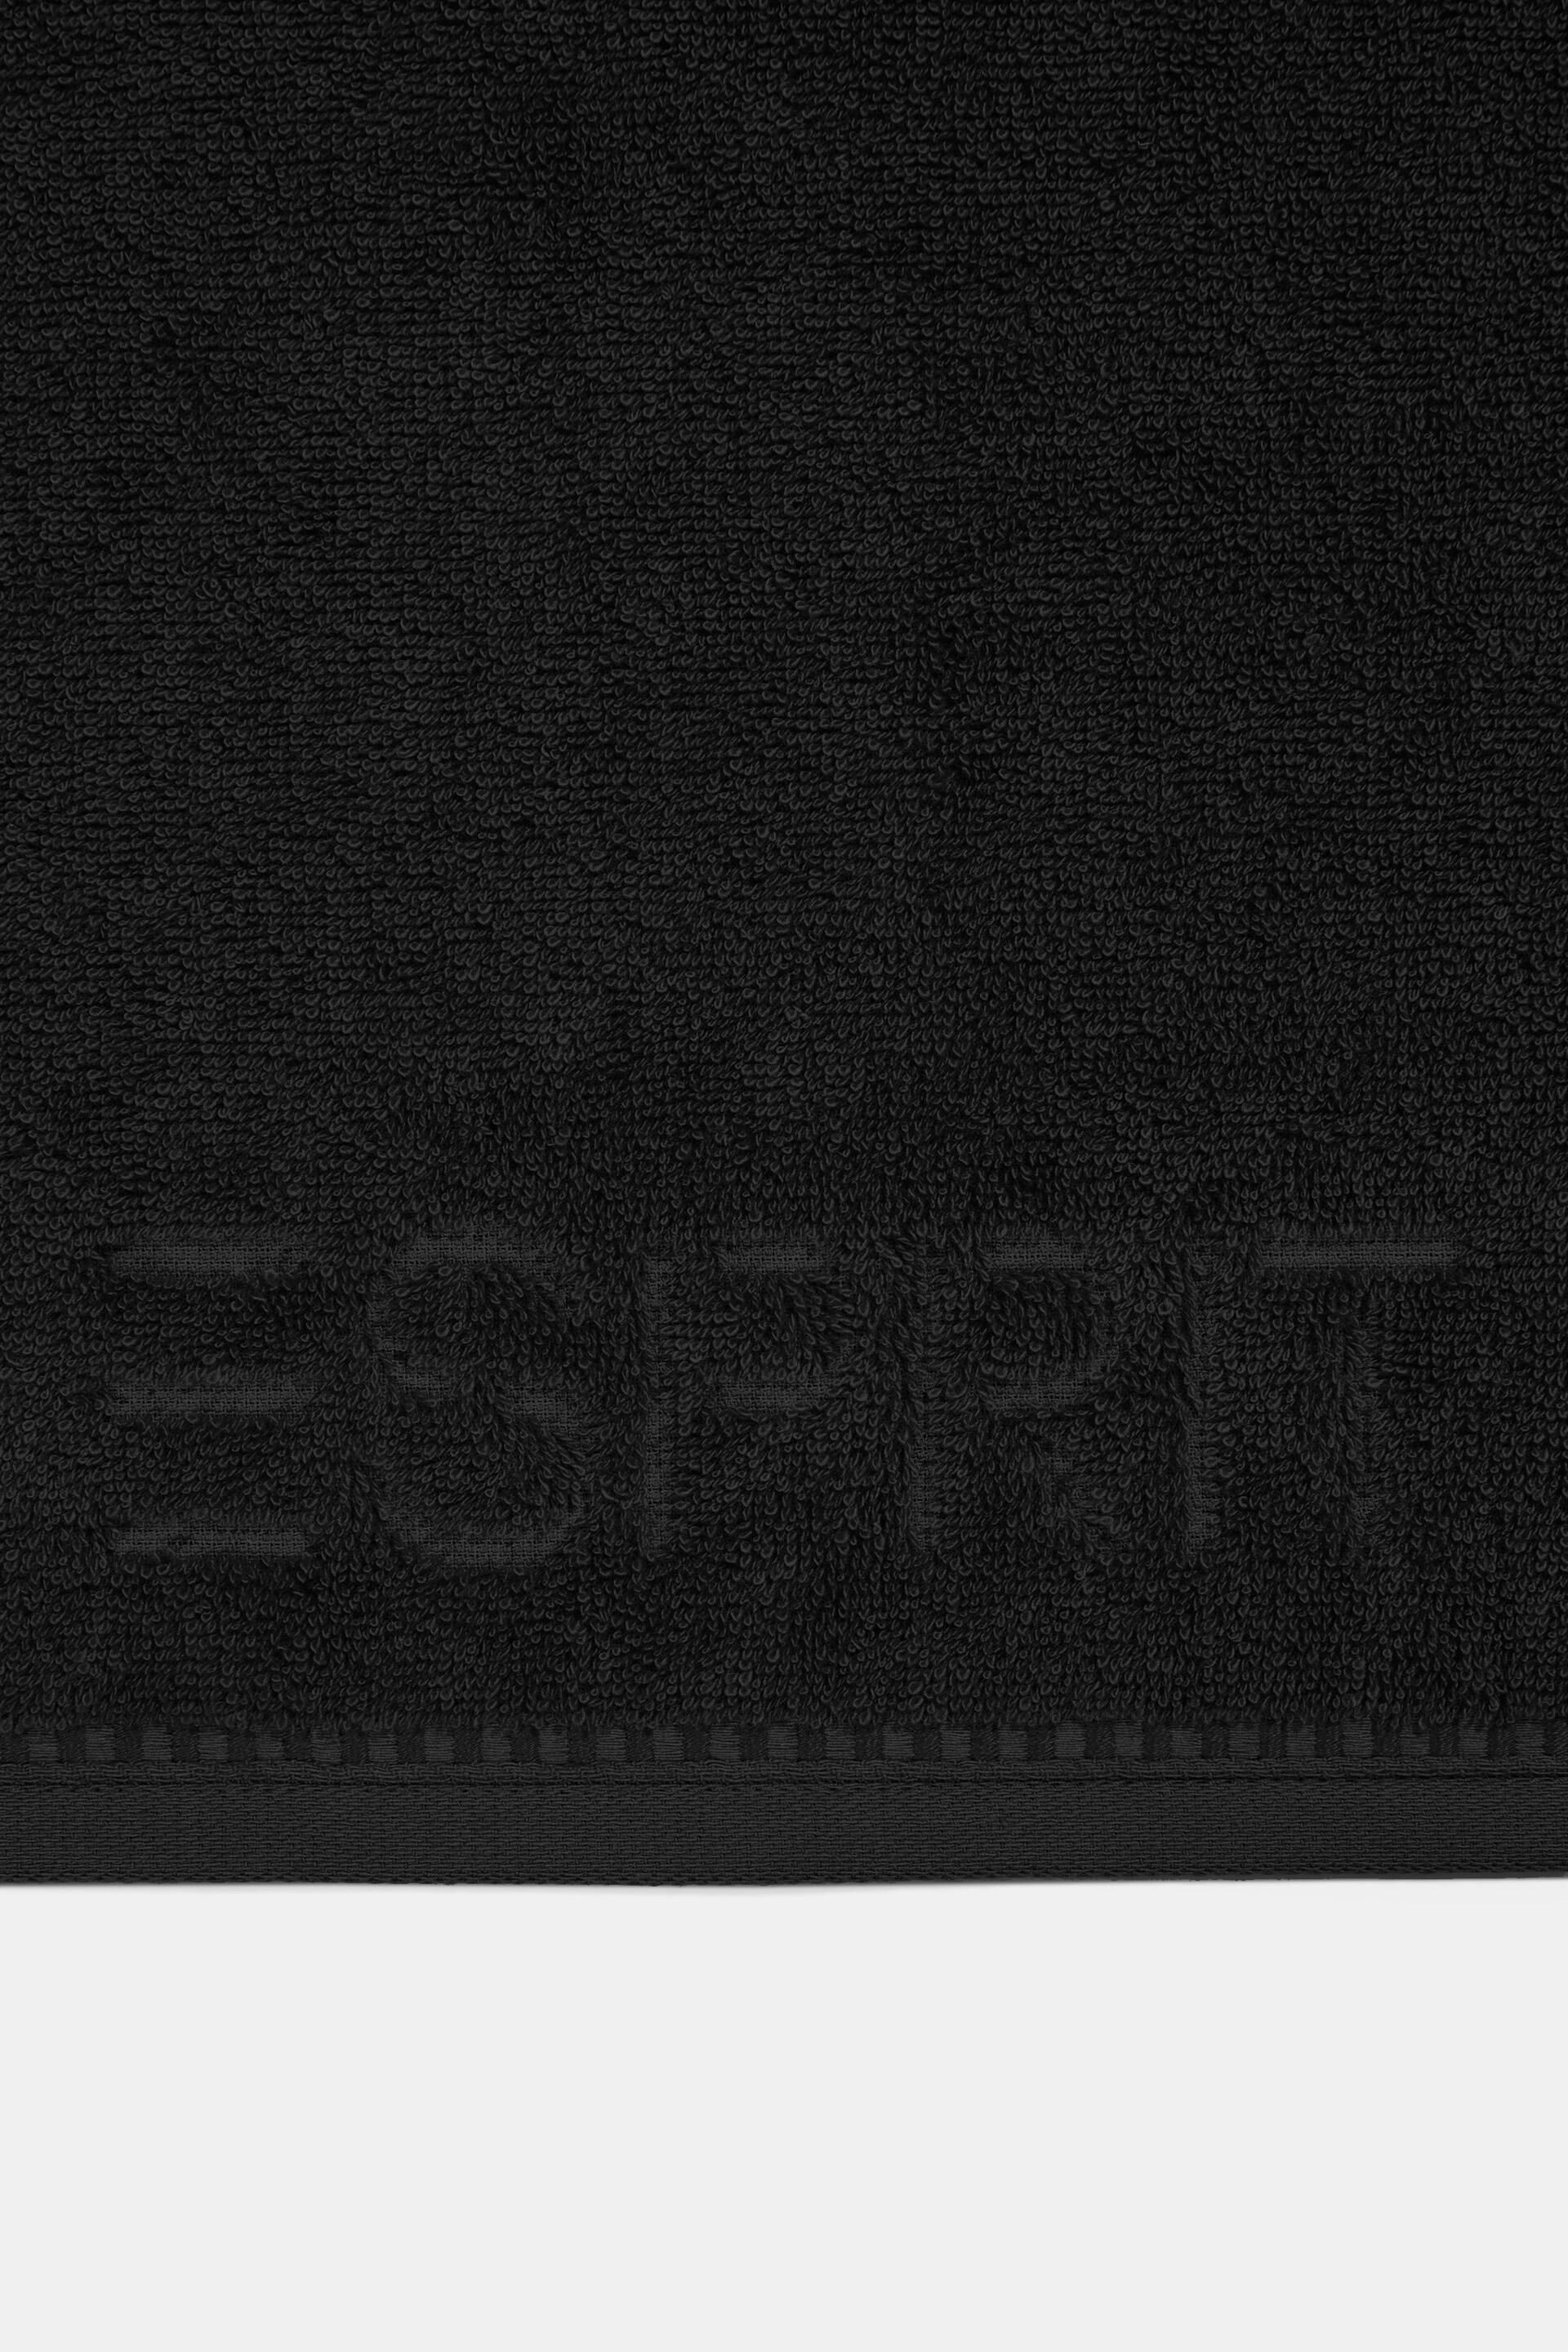 Esprit towel cloth Terry collection